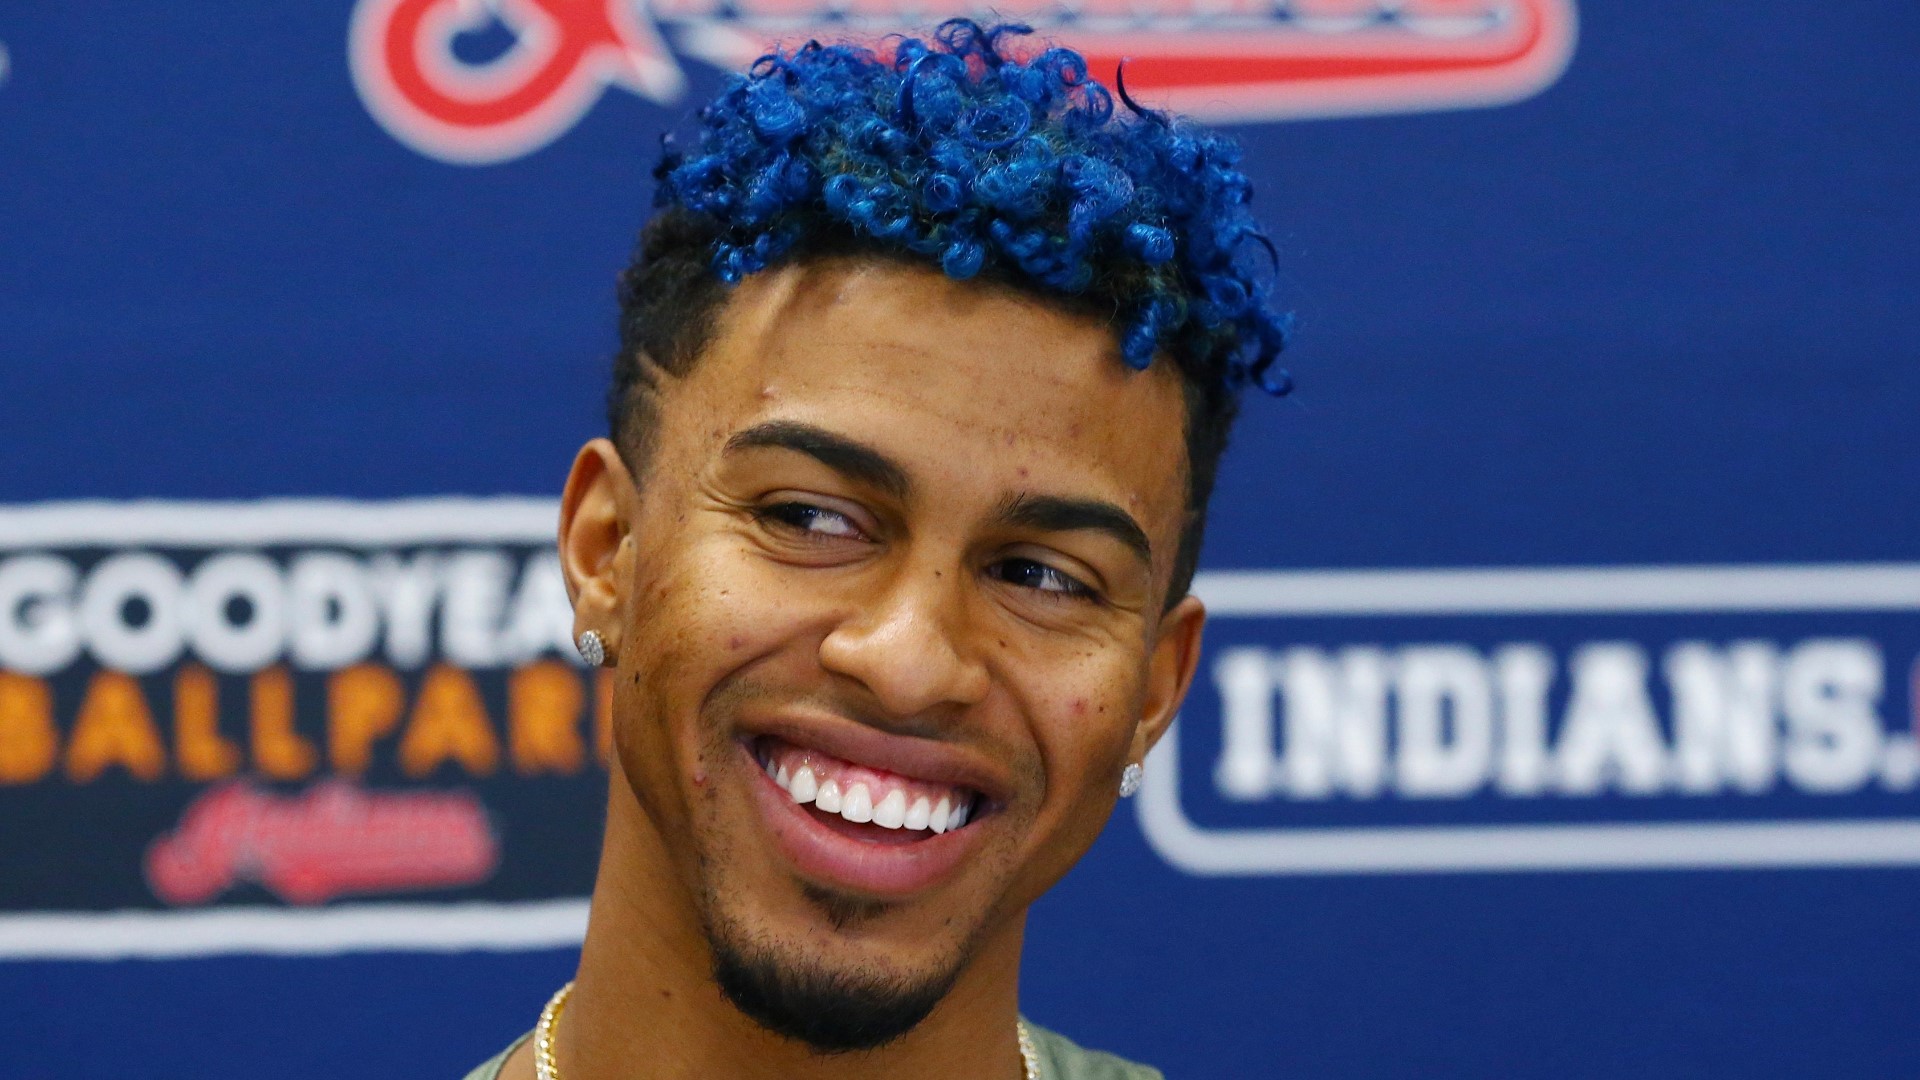 Frankie Lindor's Blue Hair: A Look at the Cleveland Indians' Star's Iconic Hairstyle - wide 1